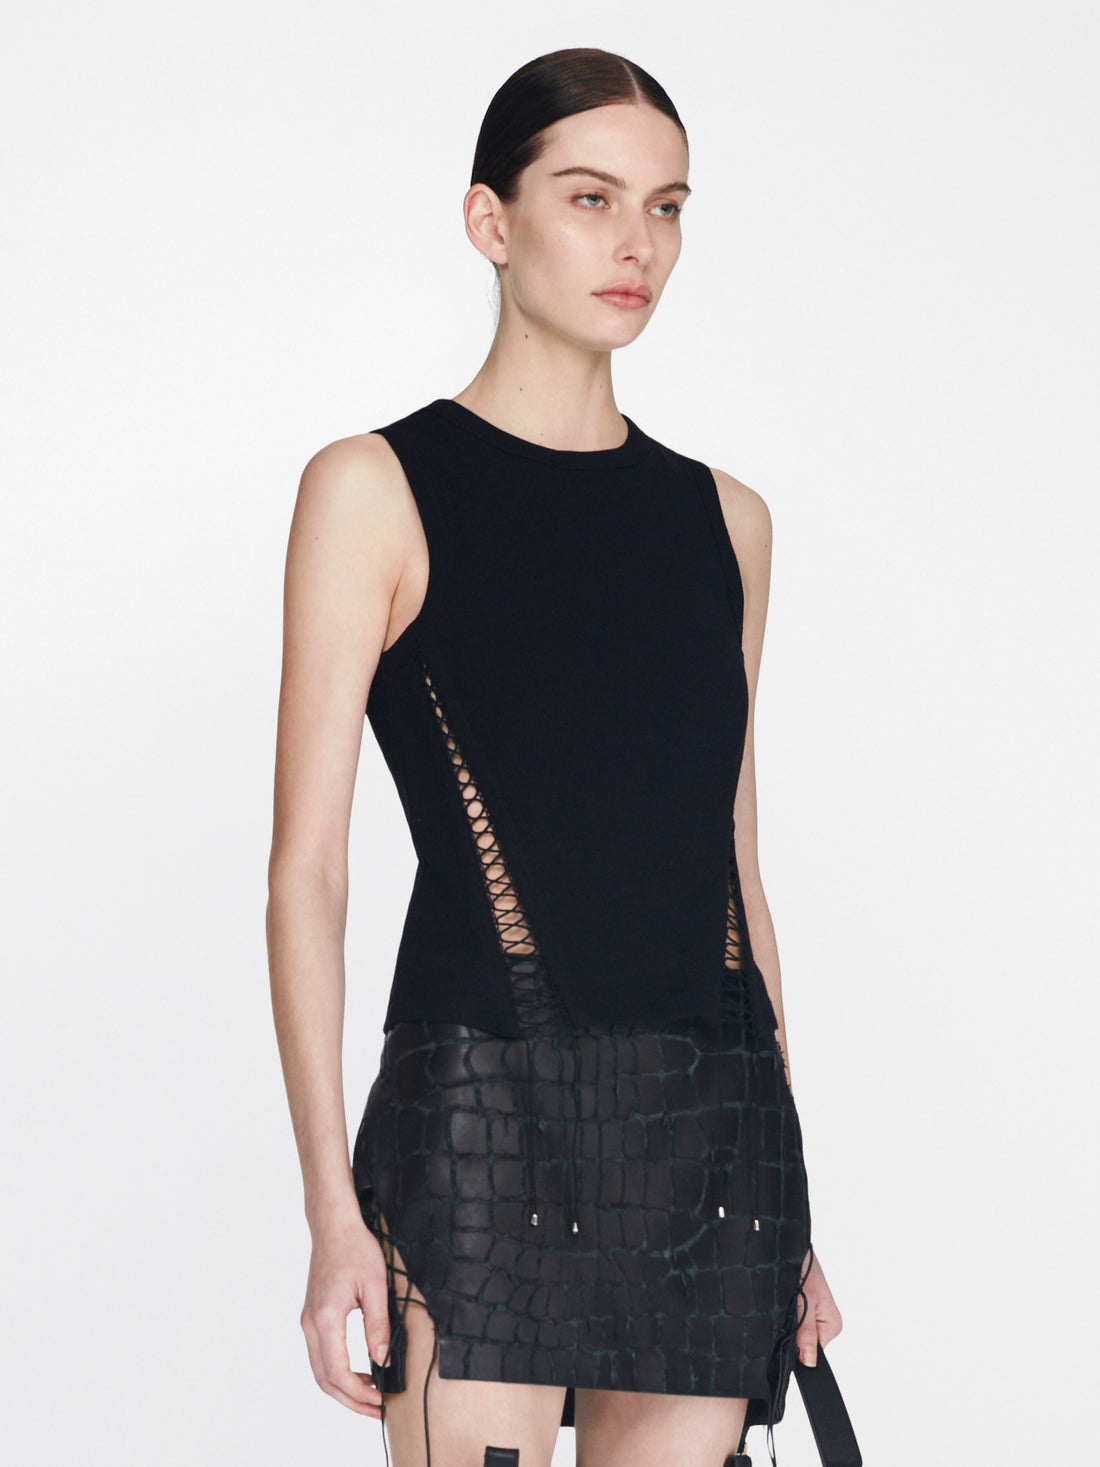 Dion Lee Picot Lace Muslce Tee in Black available at TNT The New Trend Australia